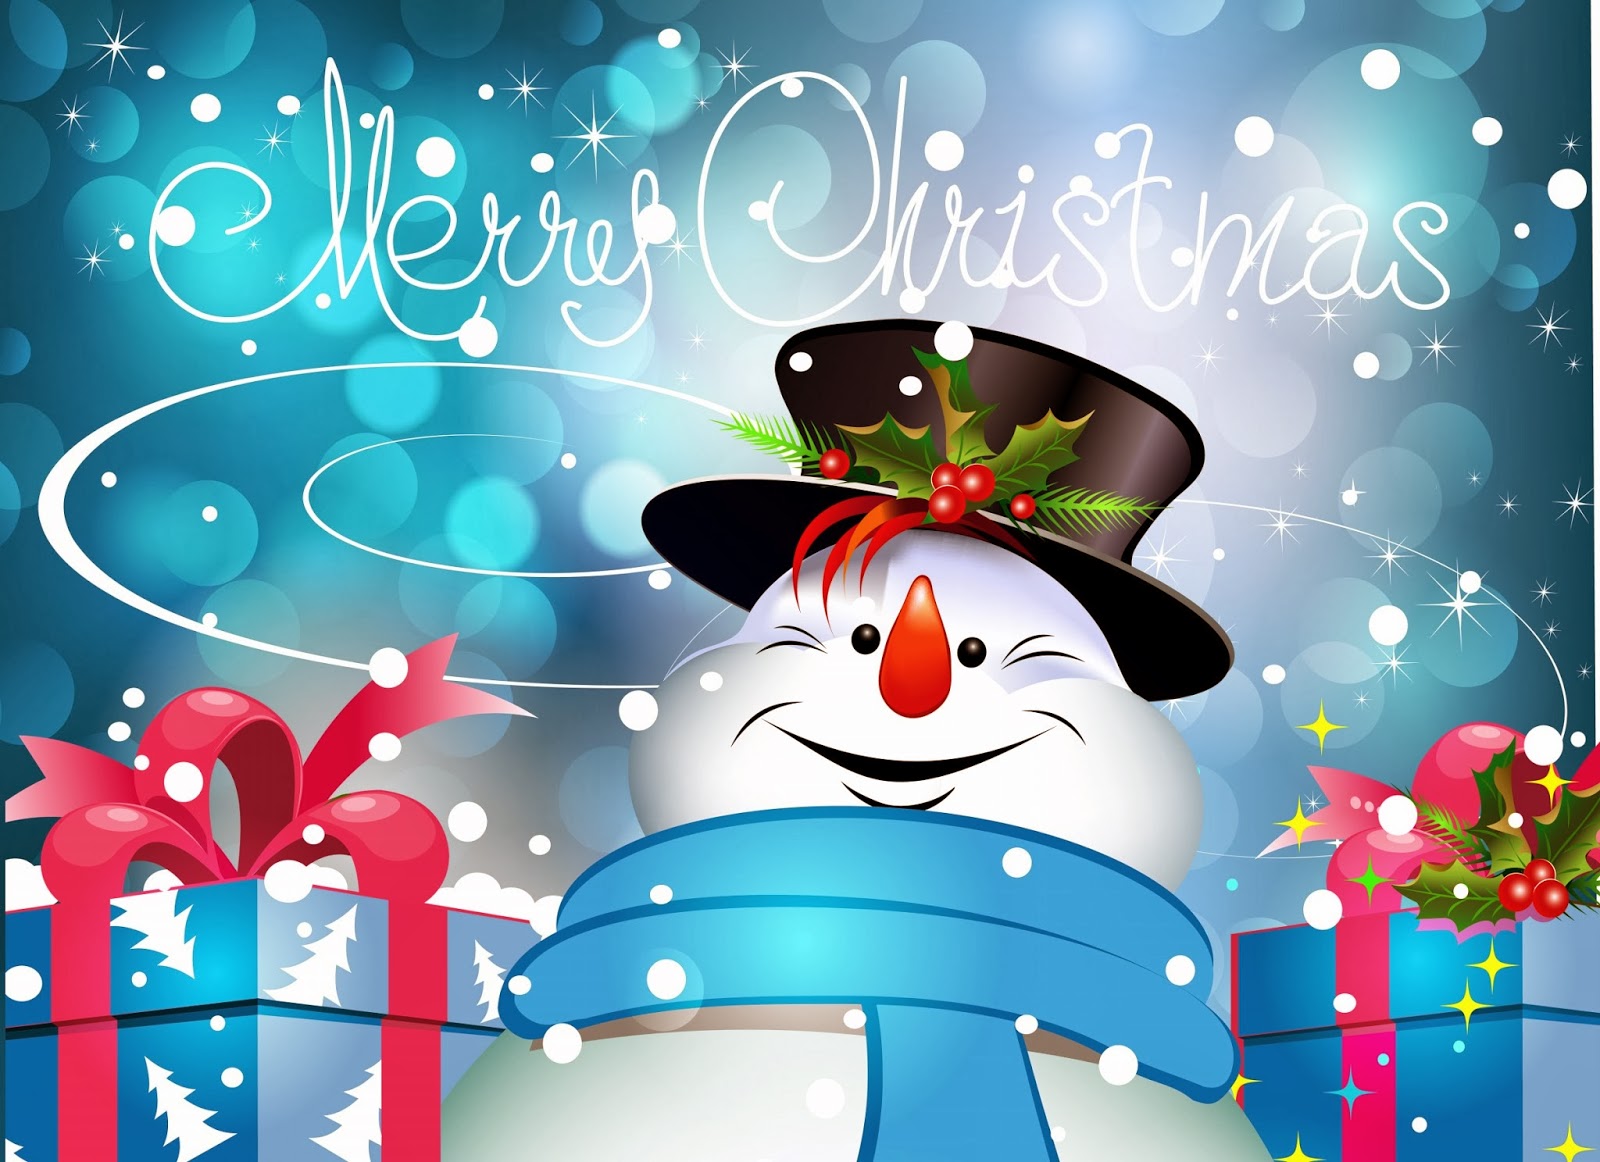 Merry Christmas 2014 Greetings eCards,Wallpapers,Cards 